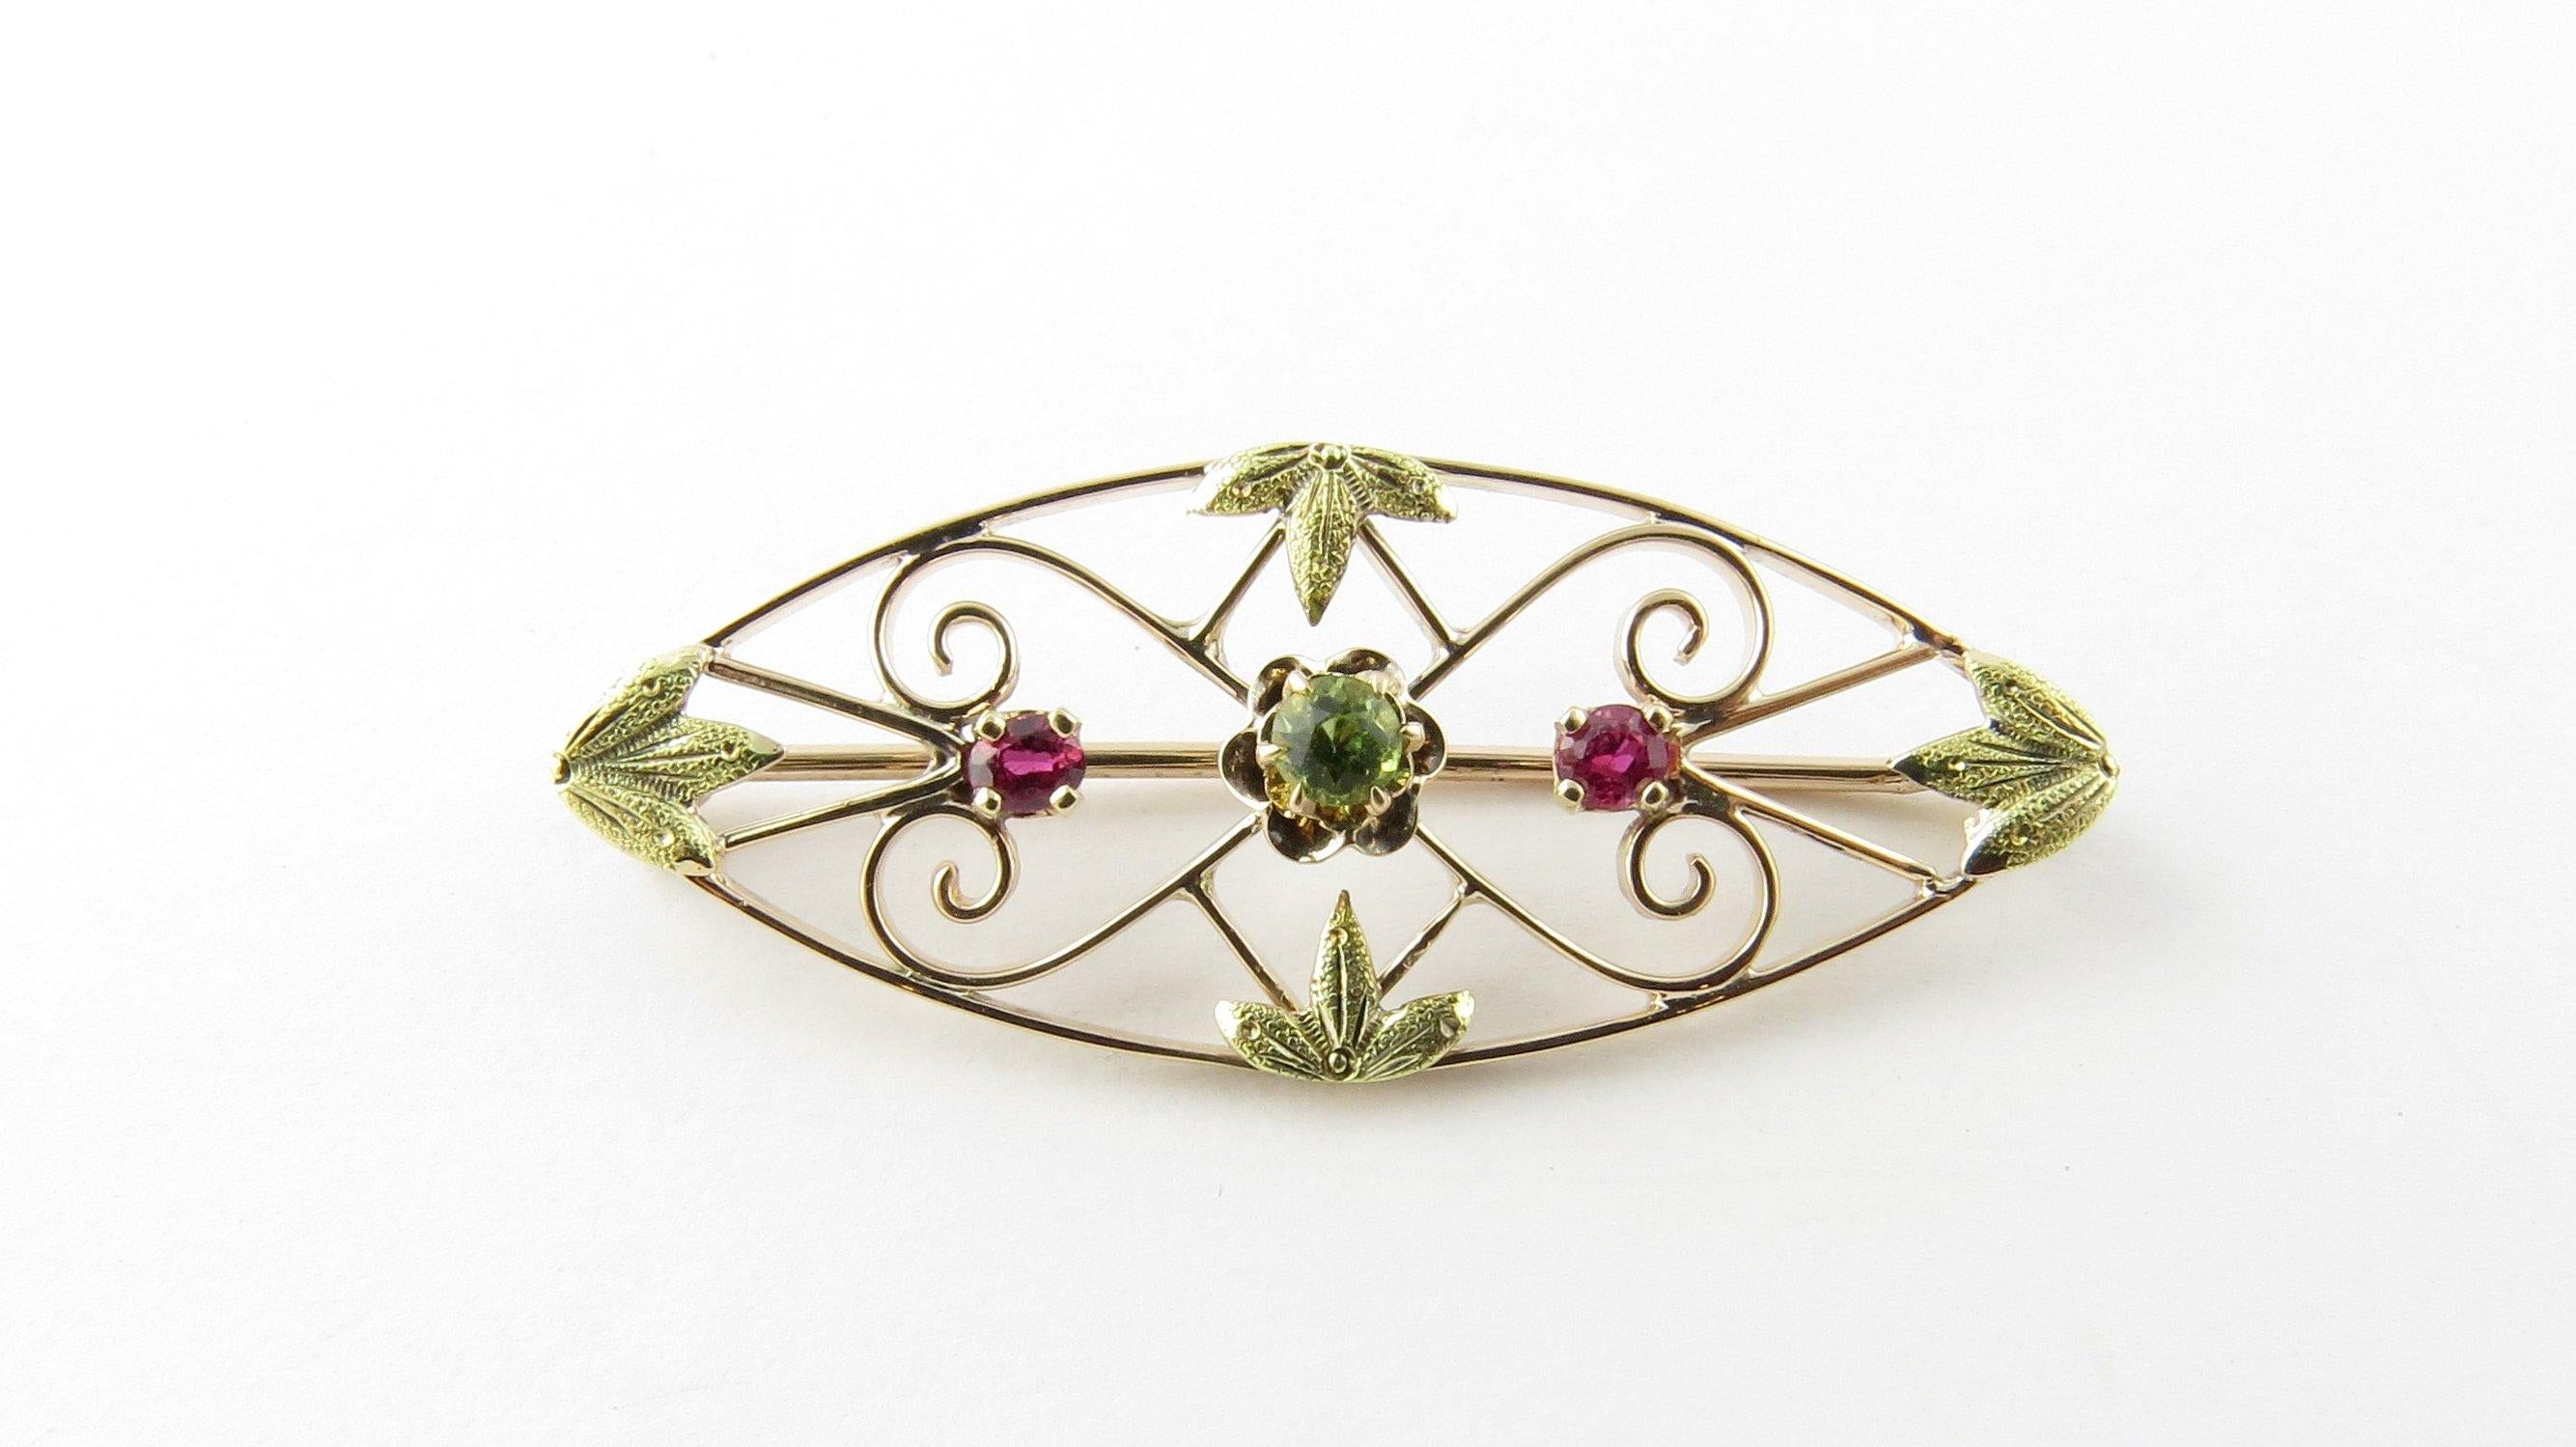 Vintage 10 Karat Yellow Gold Ruby and Peridot Brooch/Pin- 
This elegant brooch features two round rubies (3 mm each) and one round peridot (4 mm) set in delicate yellow gold filigree. 
Size: 13 mm x 34 mm 
Weight: 1.2 dwt. / 2.0 gr. 
Stamped 10K